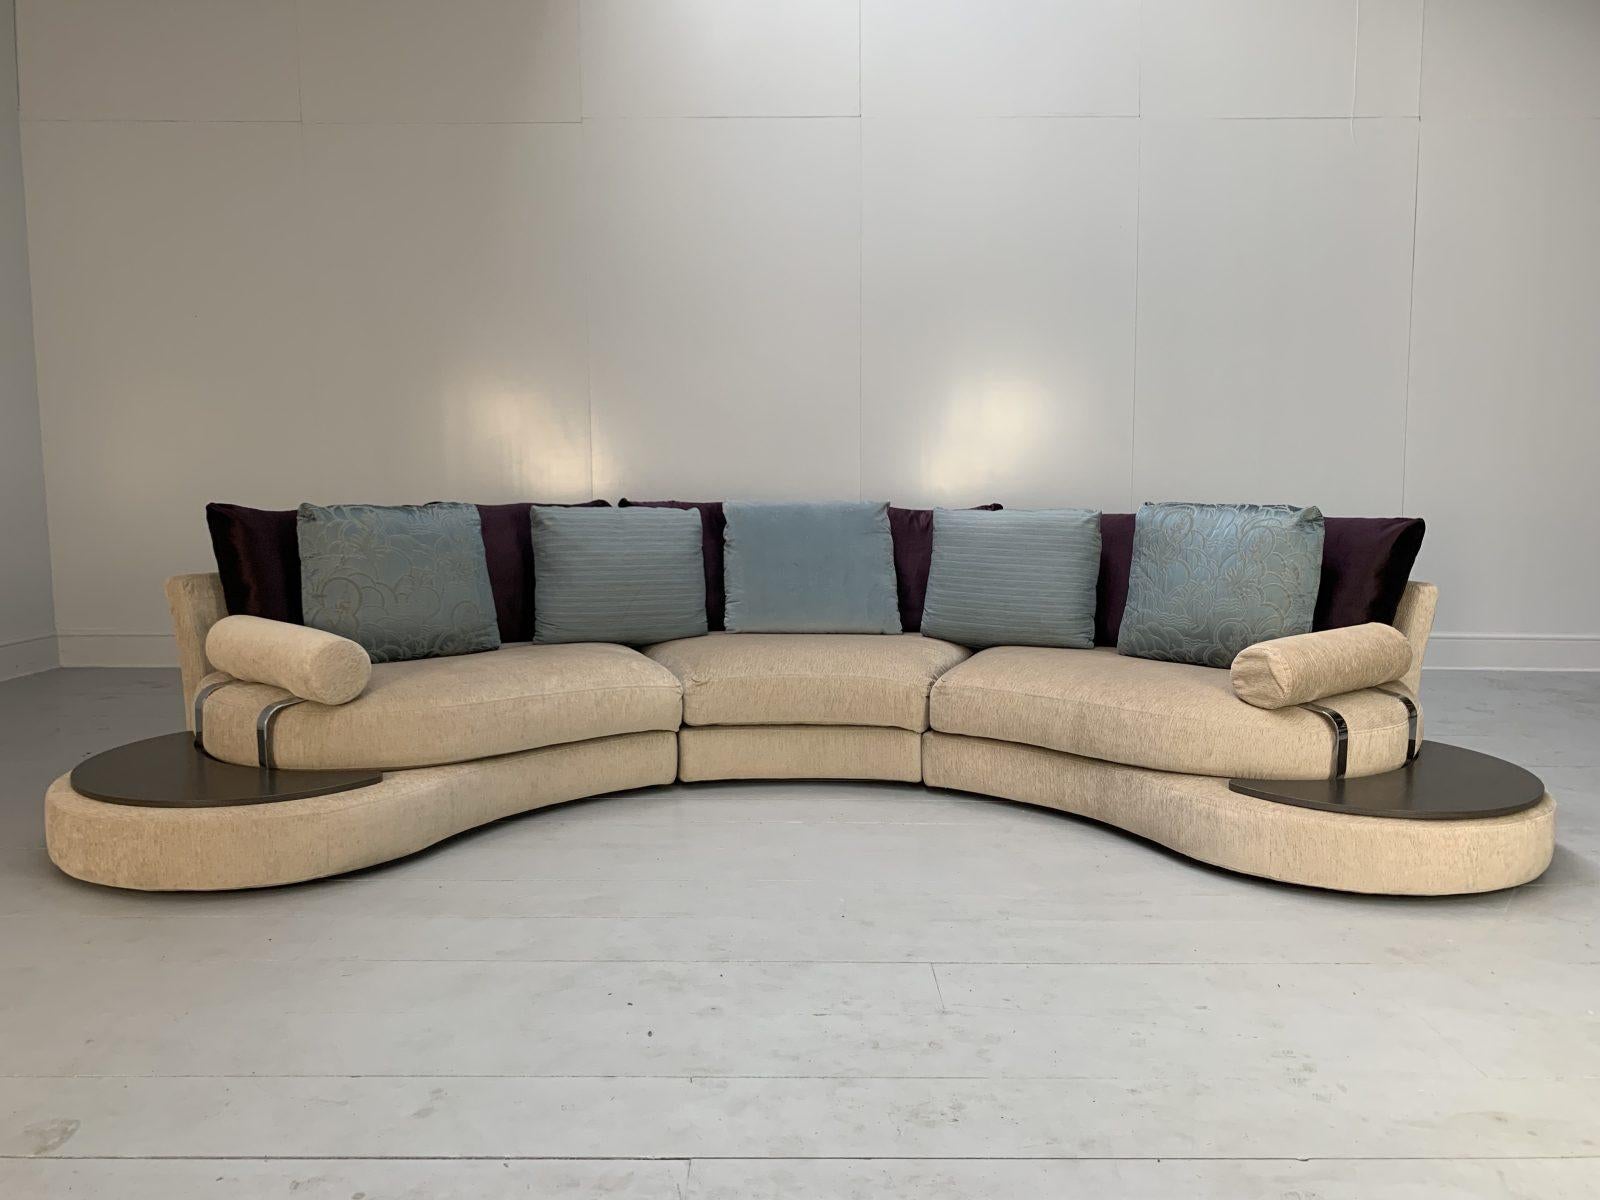 Hello Friends, and welcome to another unmissable offering from Lord Browns Furniture, the UK’s premier resource for fine Sofas and Chairs.

On offer on this occasion is quite possibly one of the most-desirable and sought-after large-scale sofas